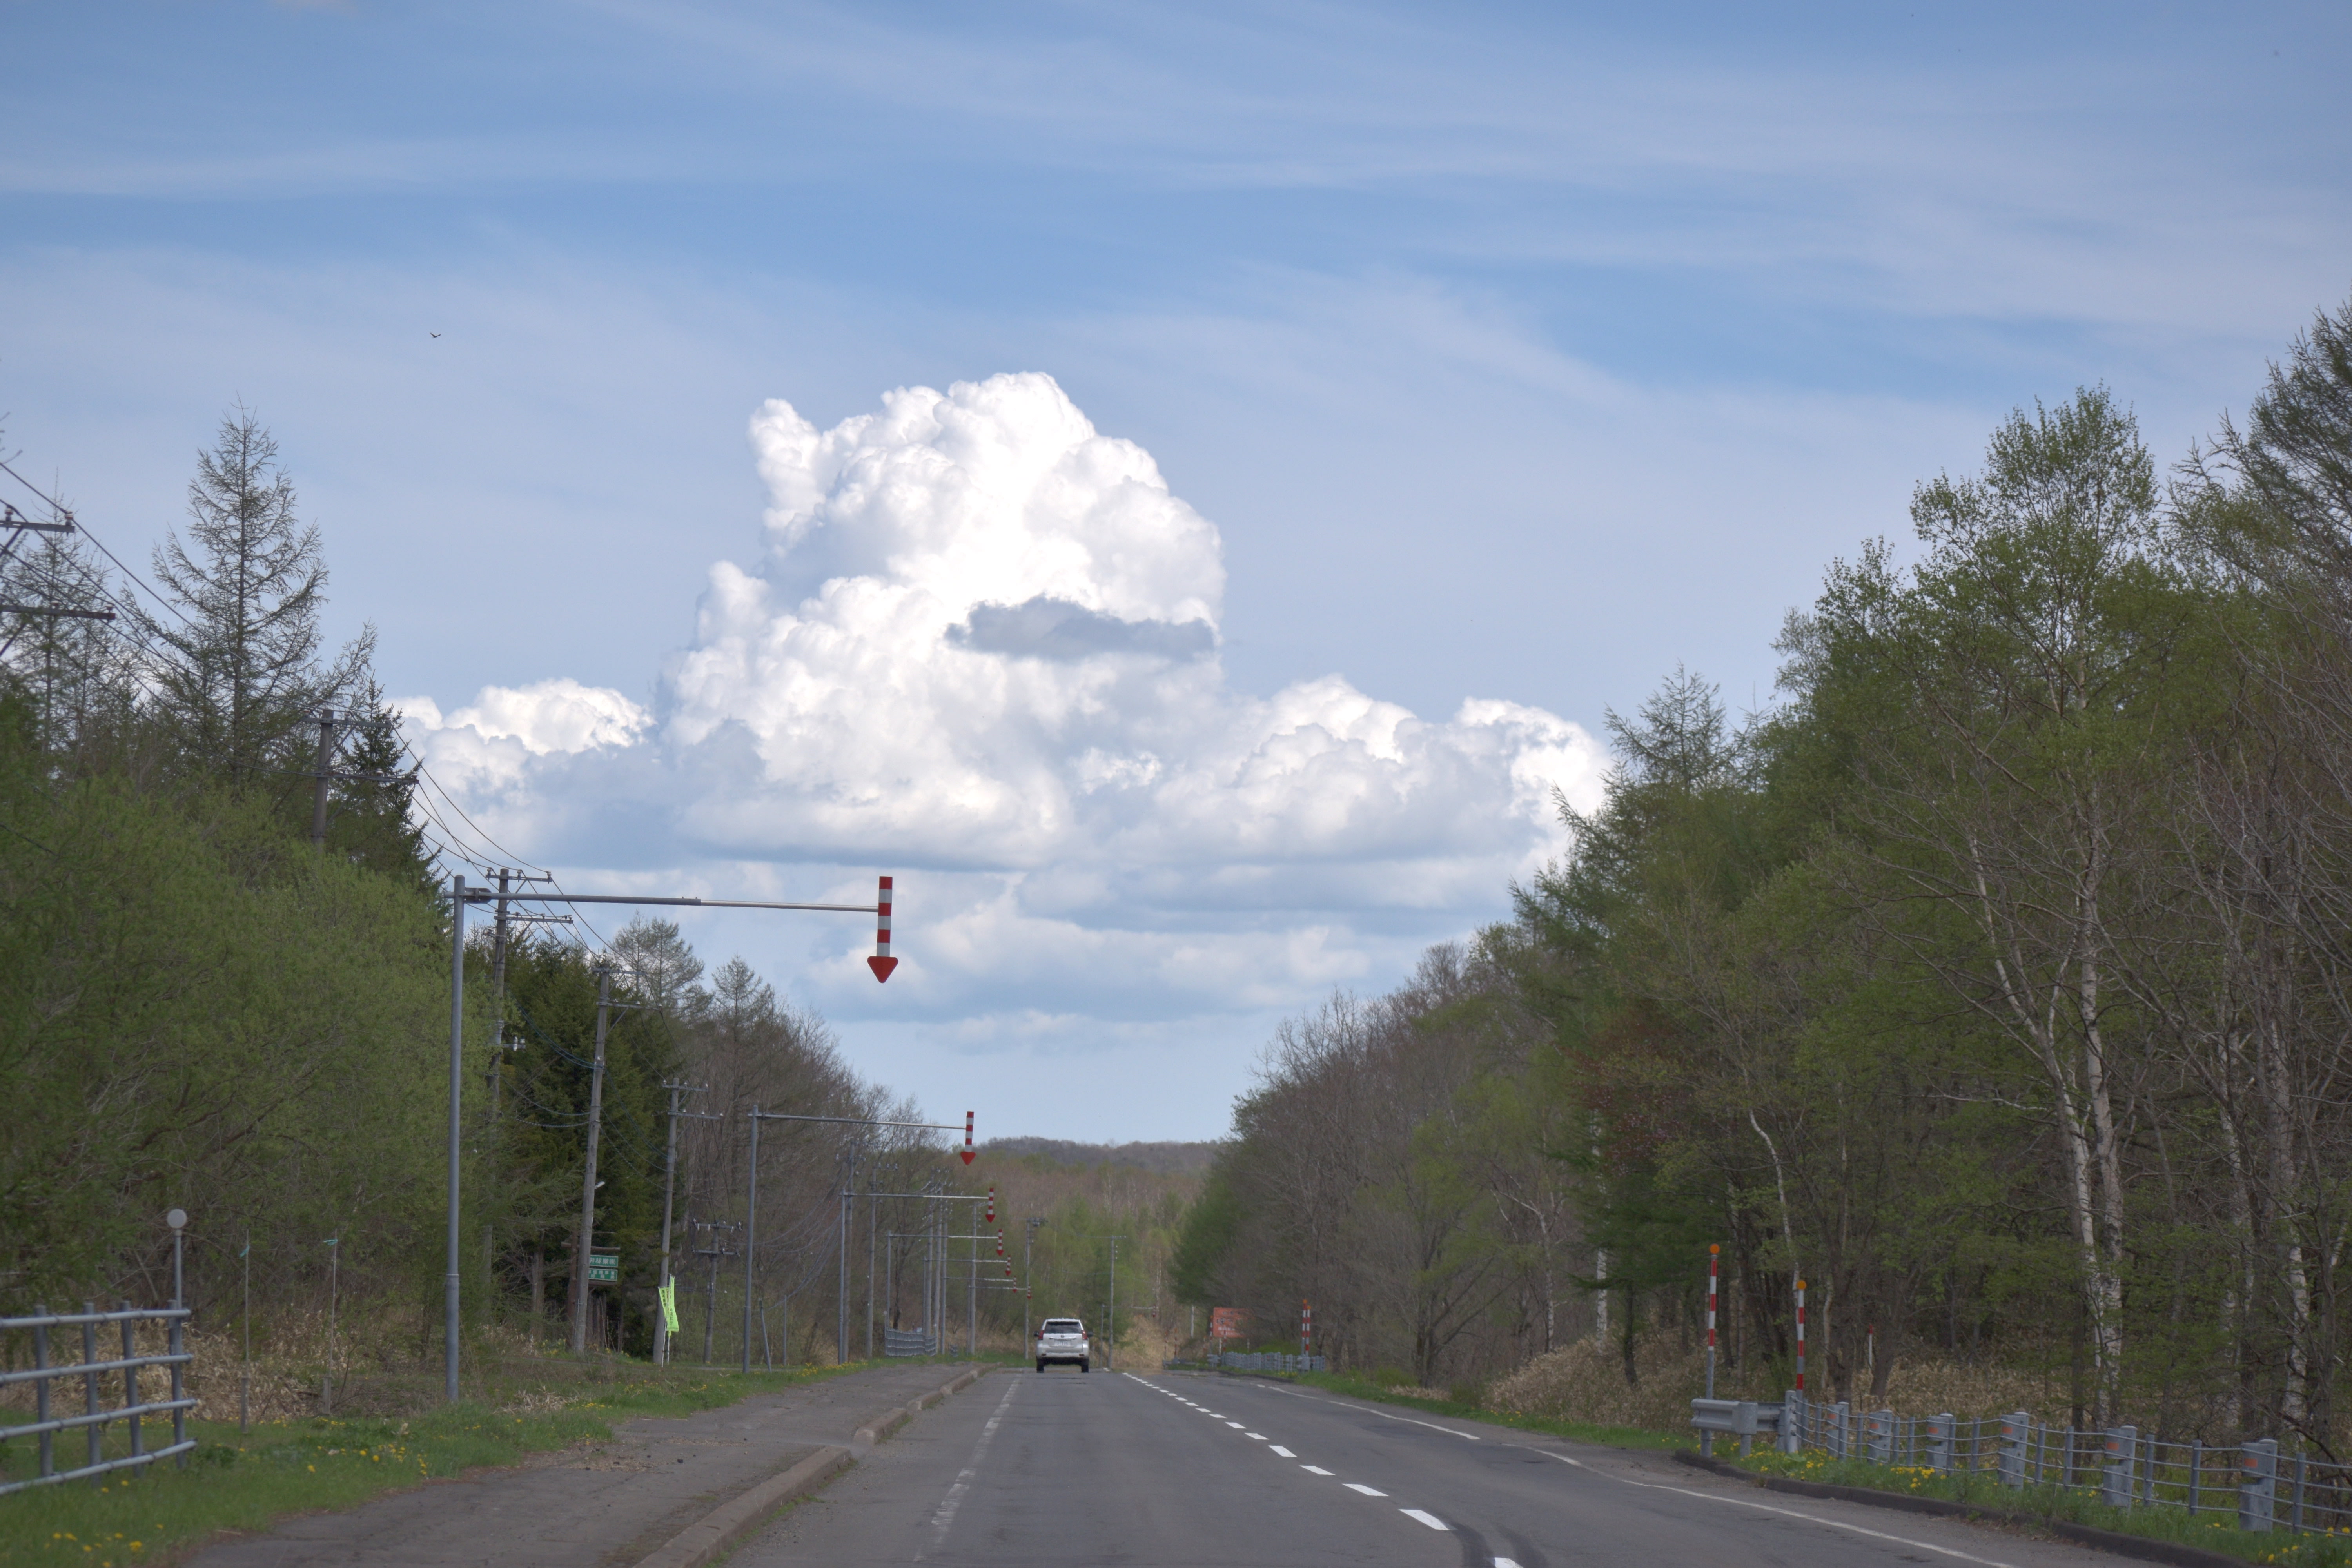 A road in Teshikaga with a prominent cloud formation in the sky.